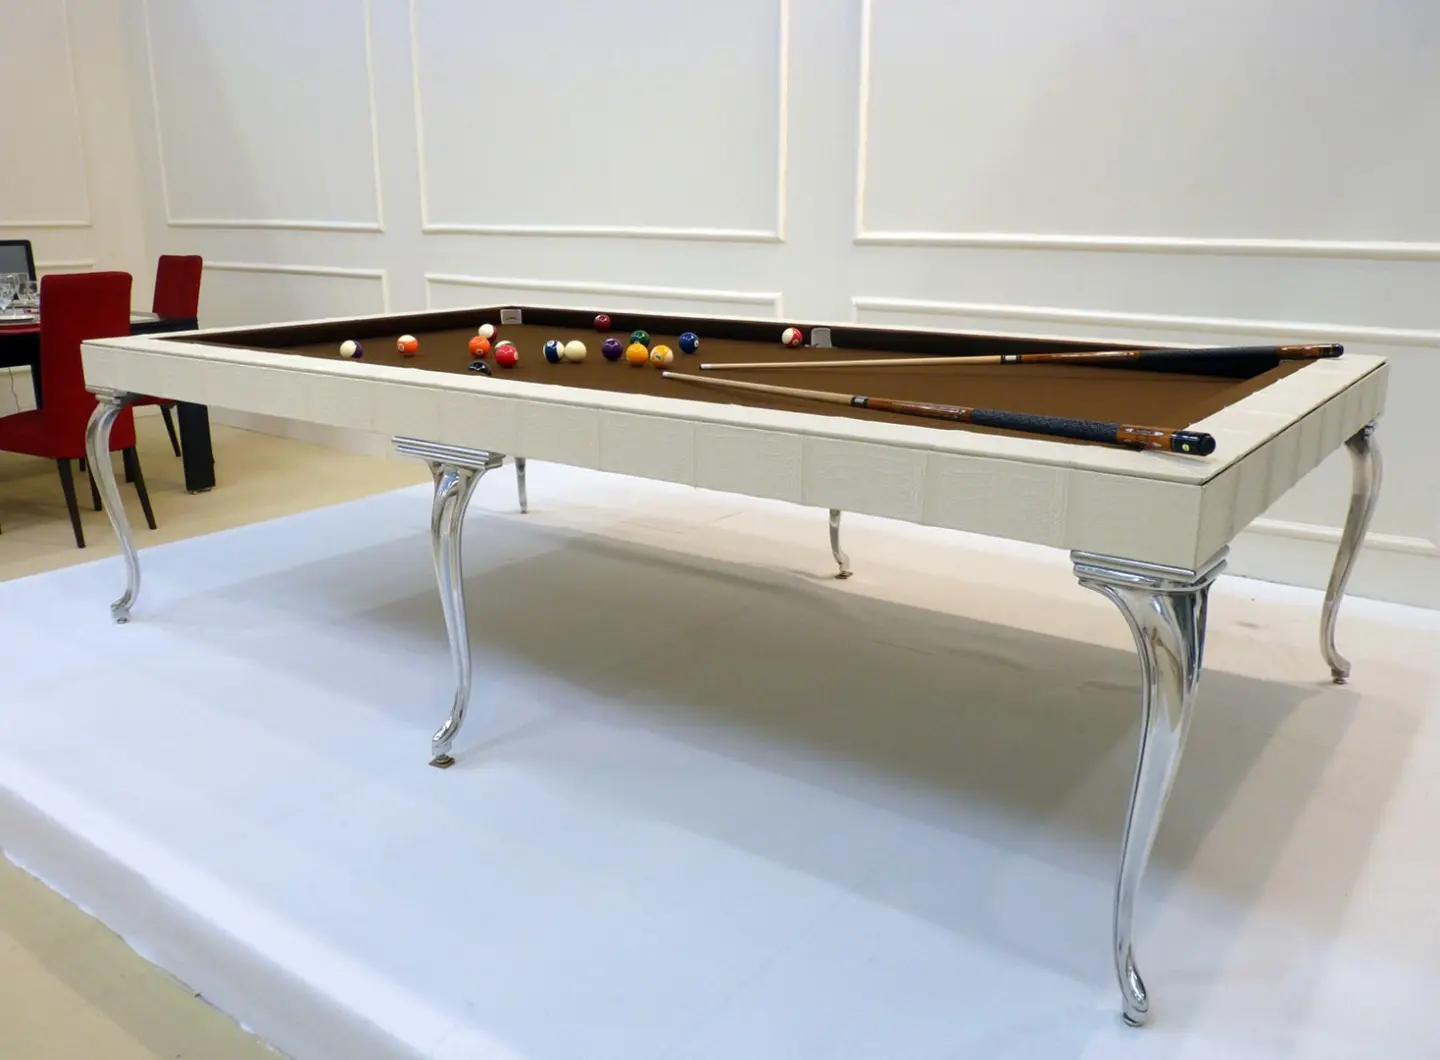 Images relating to the Pool Table Class of the Kokà collection by MBM Biliardi